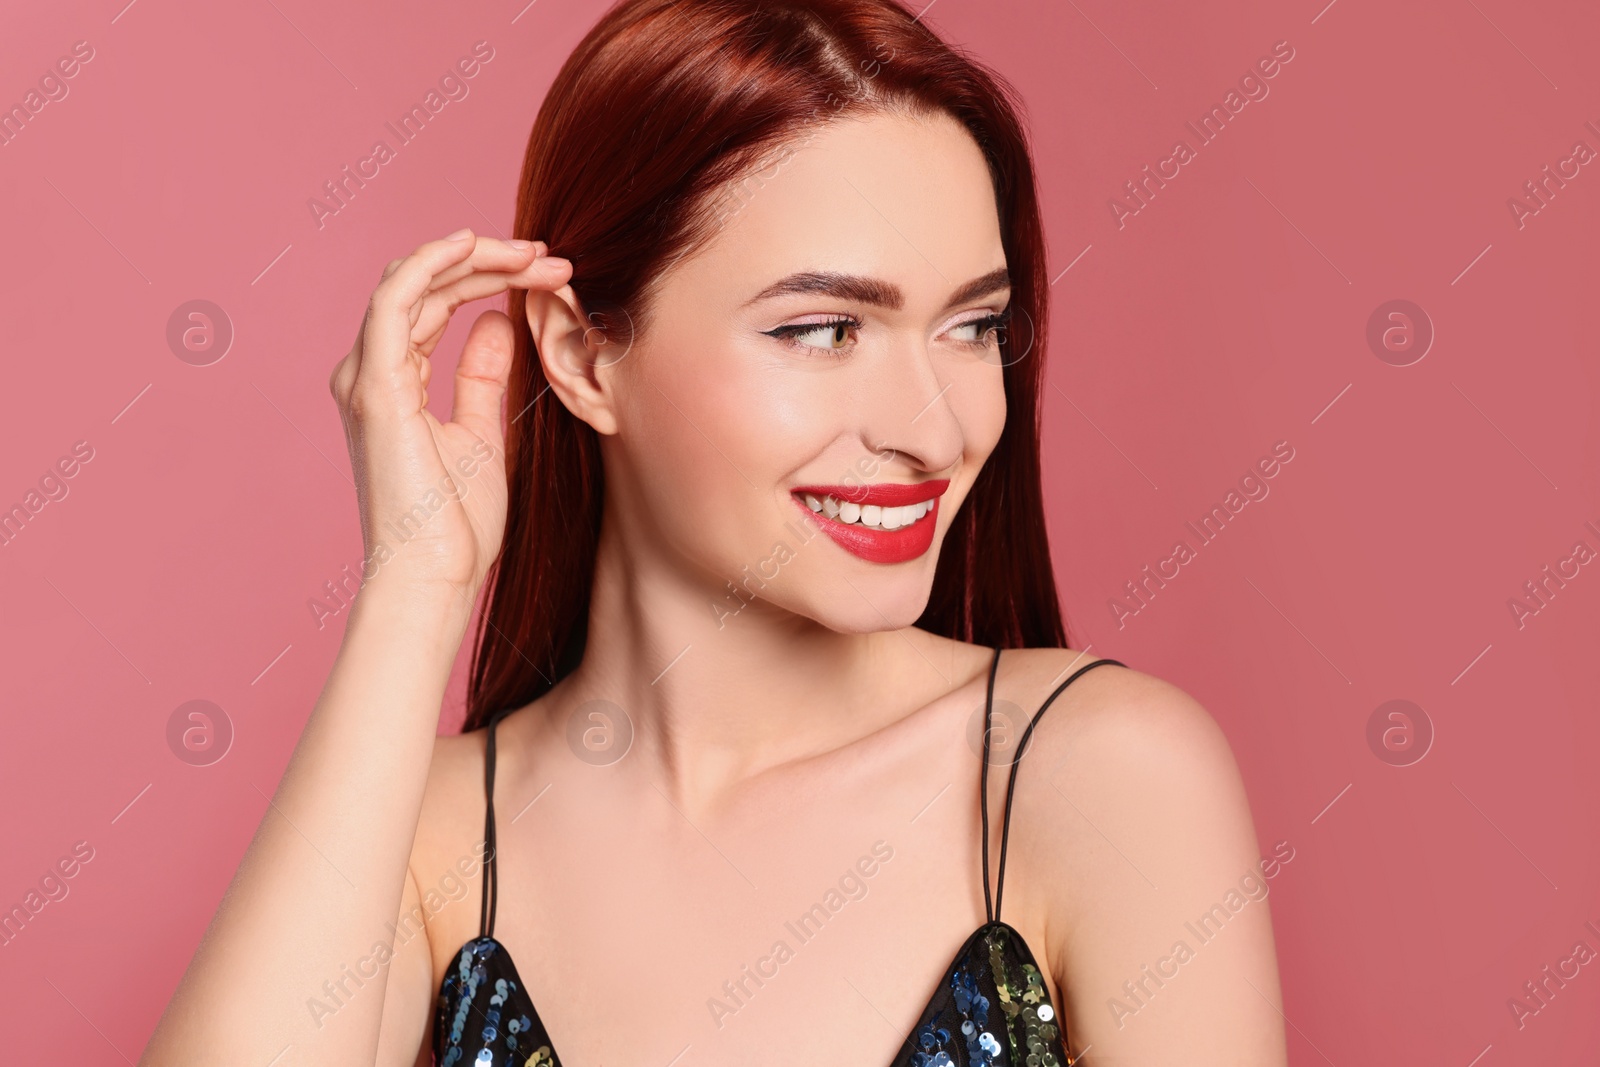 Photo of Happy woman with red dyed hair on pink background